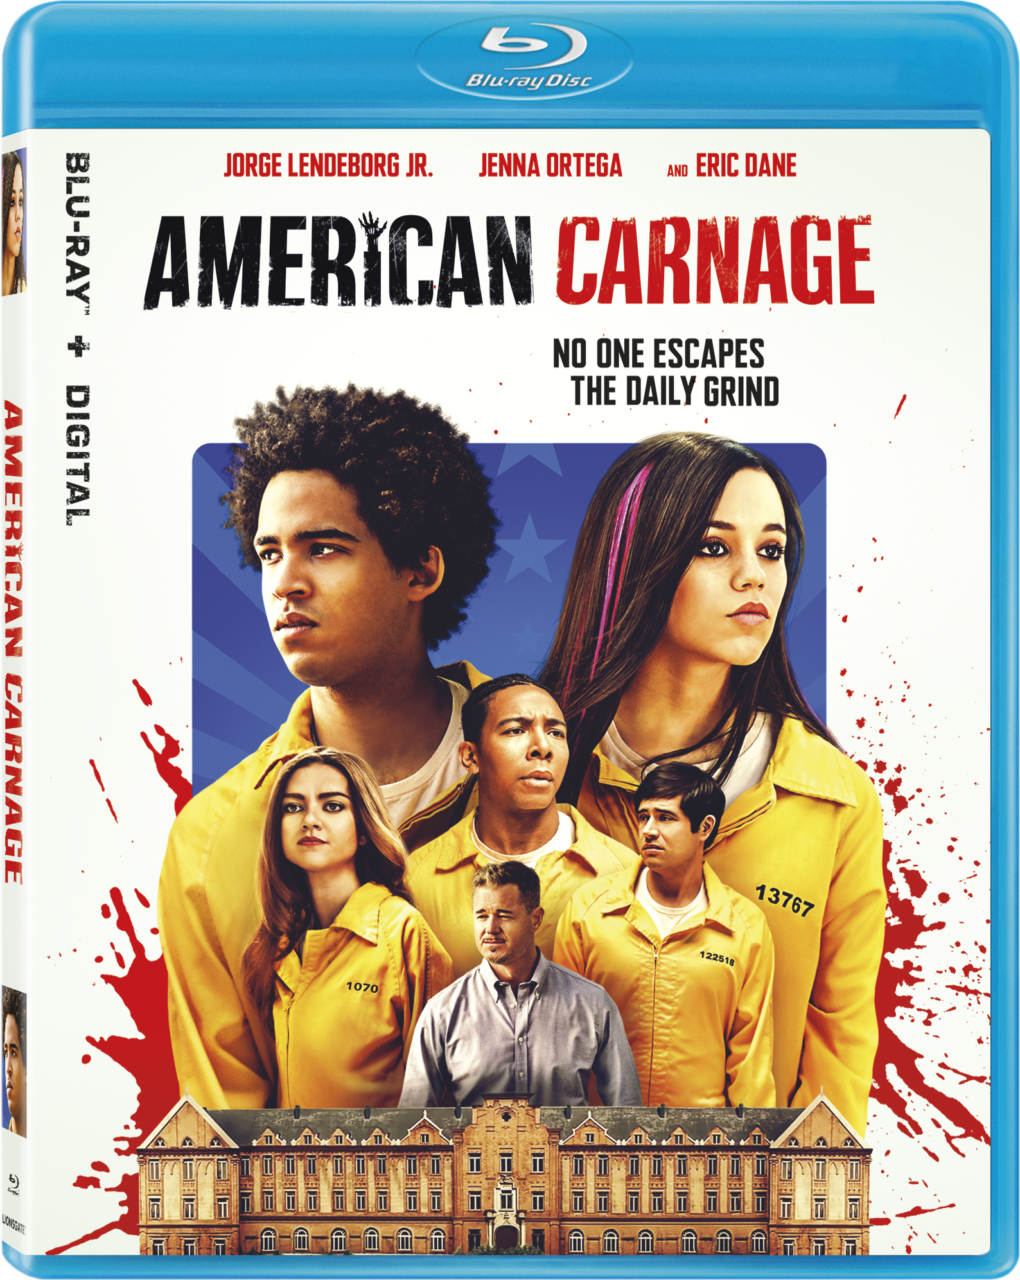 American Carnage Blu-Ray cover (Lionsgate)